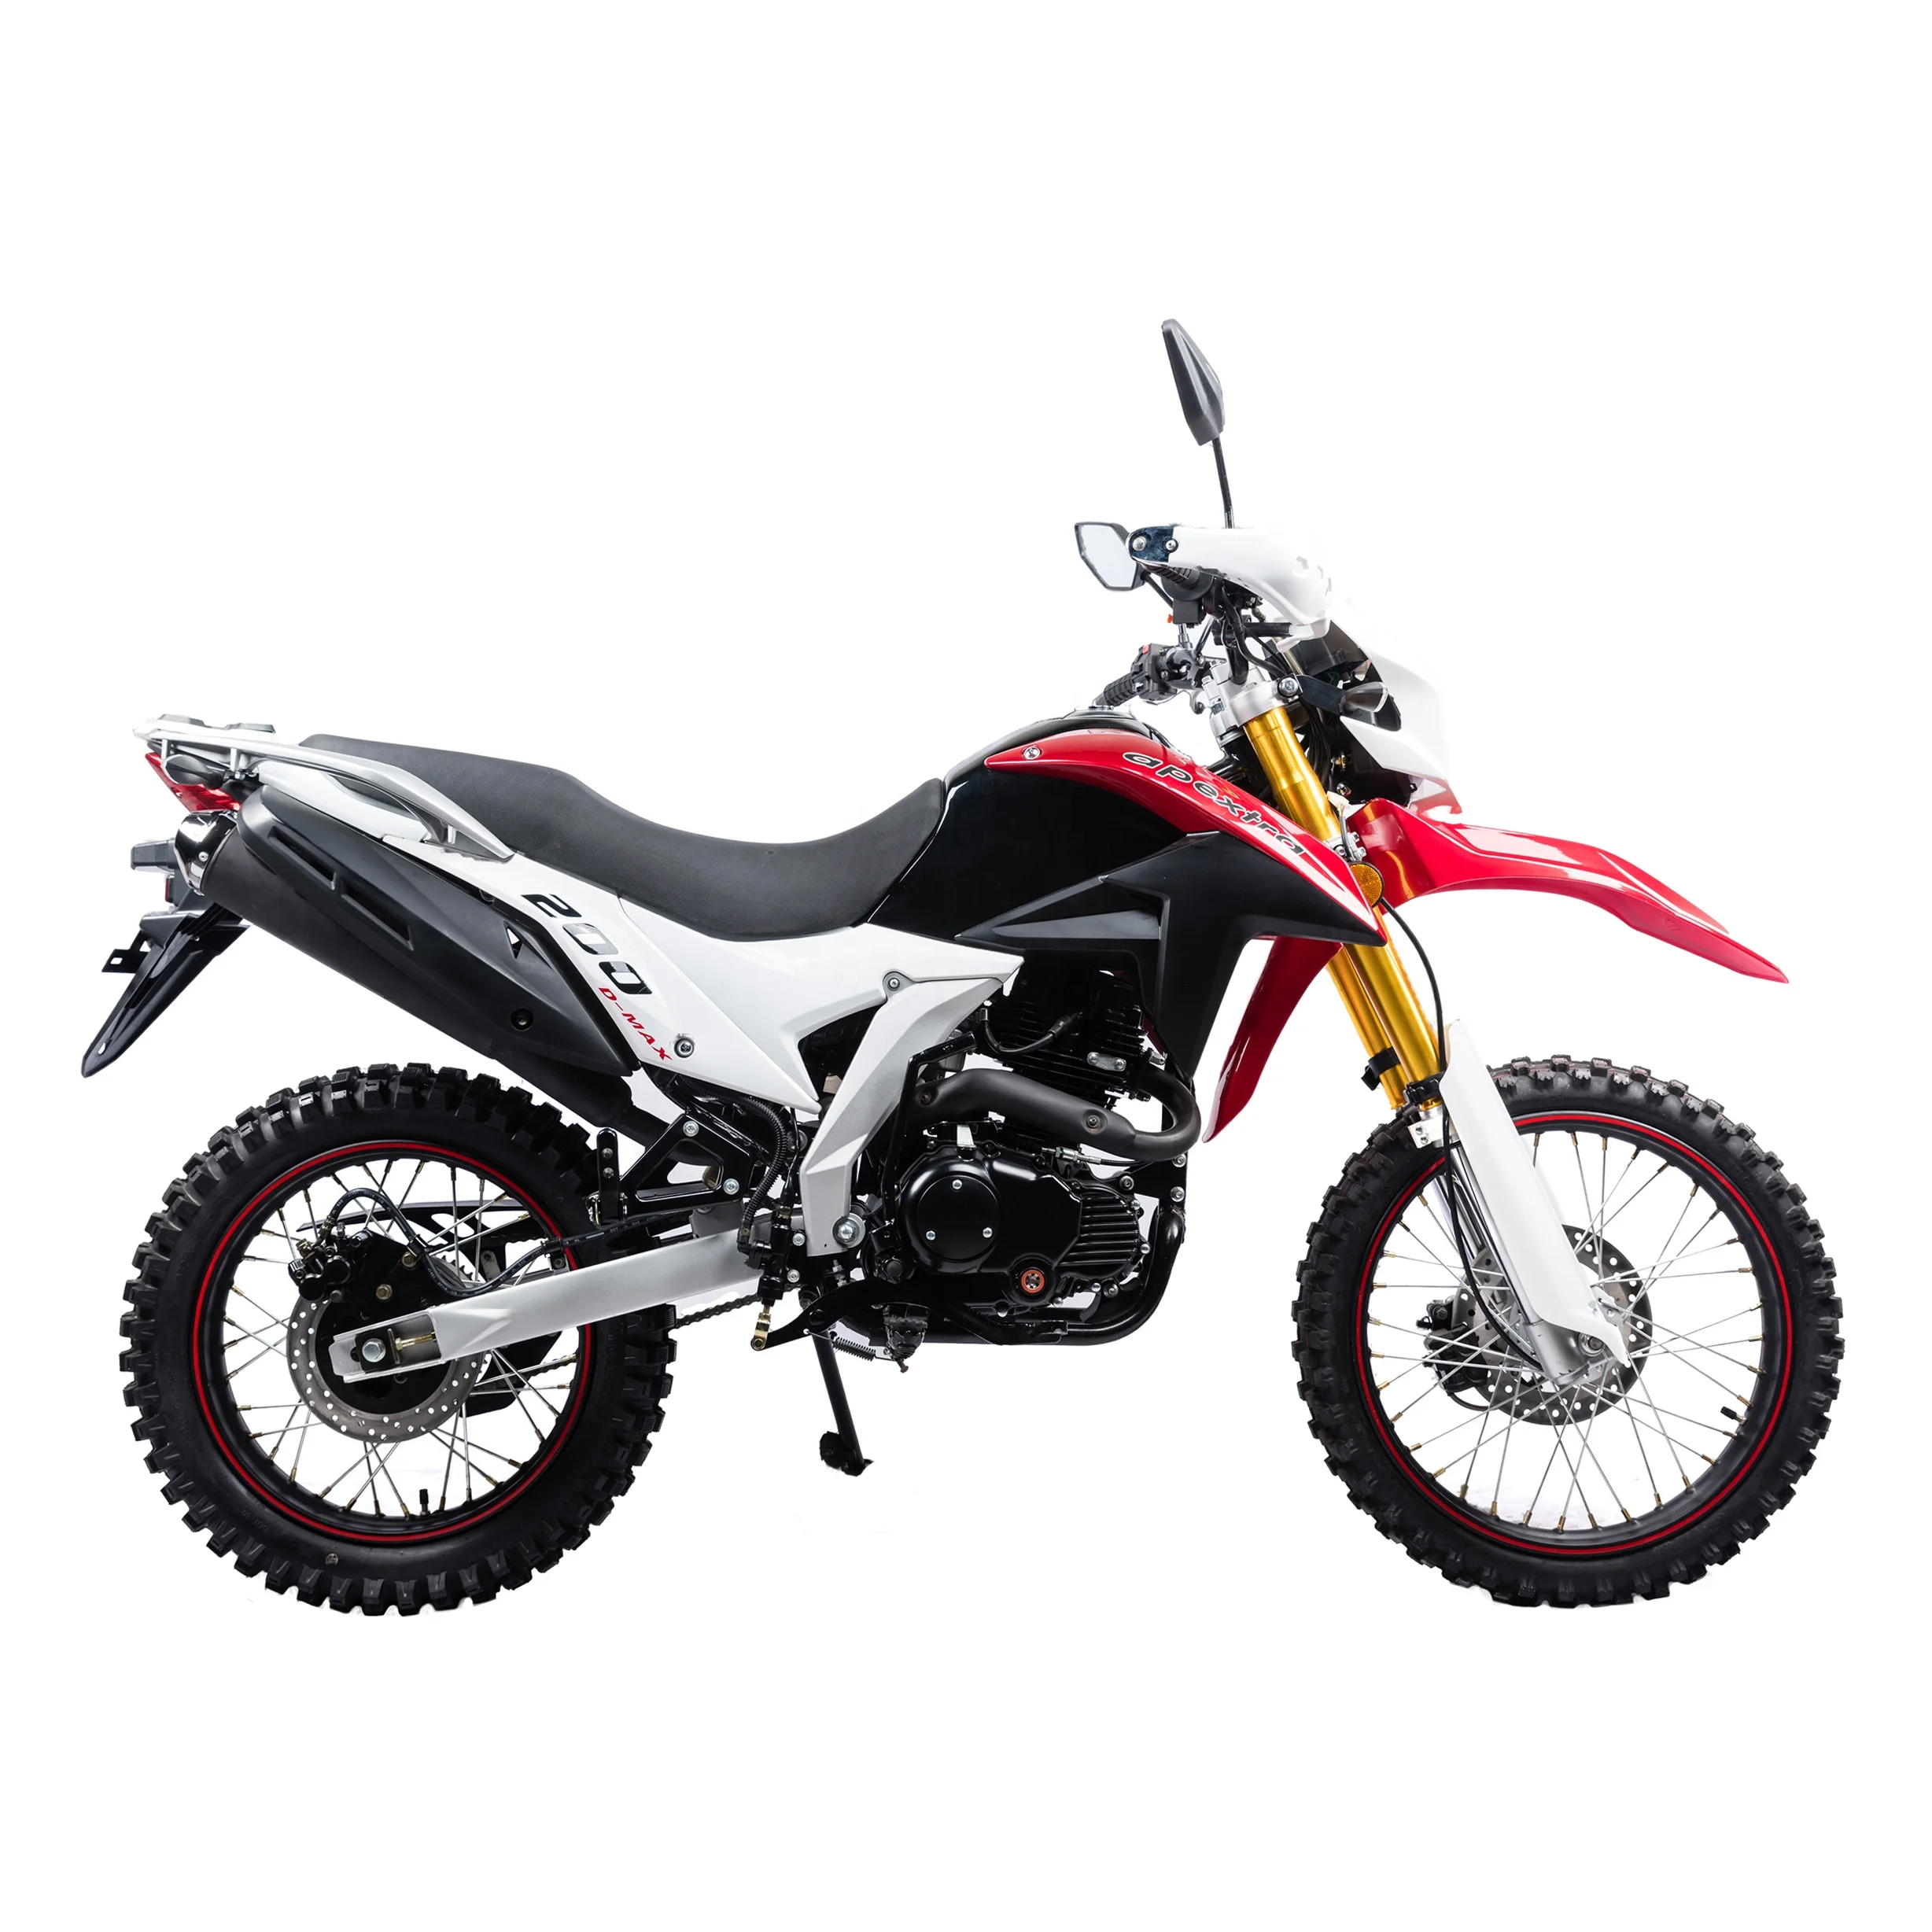 
150cc 200cc 4 stroke Motorcycle Dirt Bike on Road and Off Road Gas Racing Classic Motor Cylinder  (1600190410592)